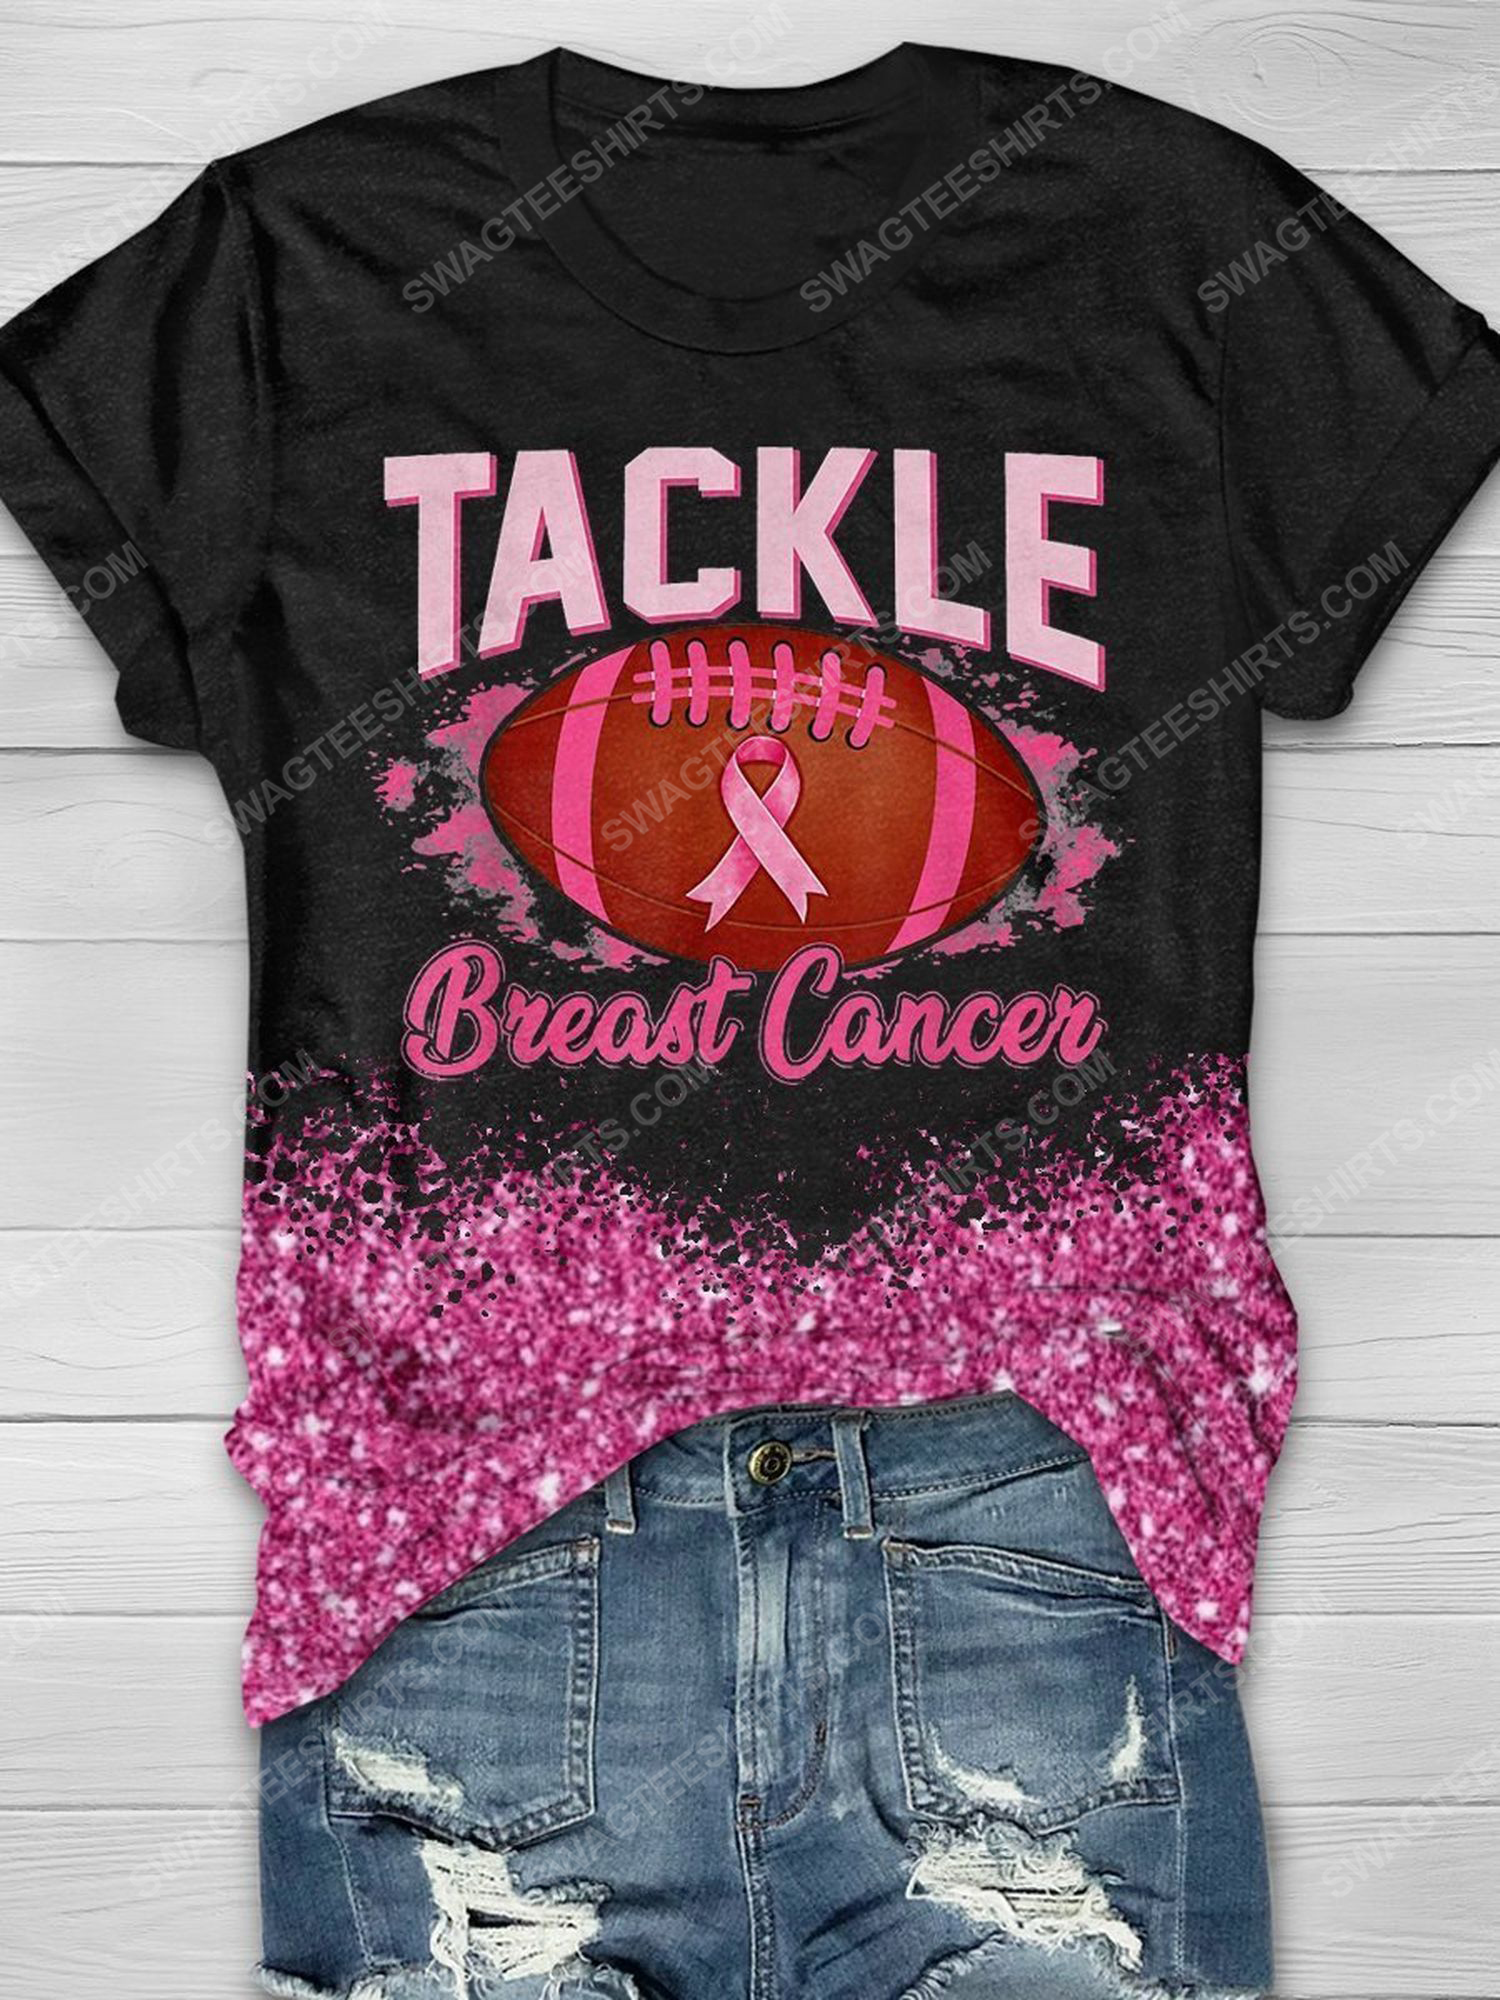 Breast cancer awareness tackle football breast cancer full print shirt 1 - Copy (3)